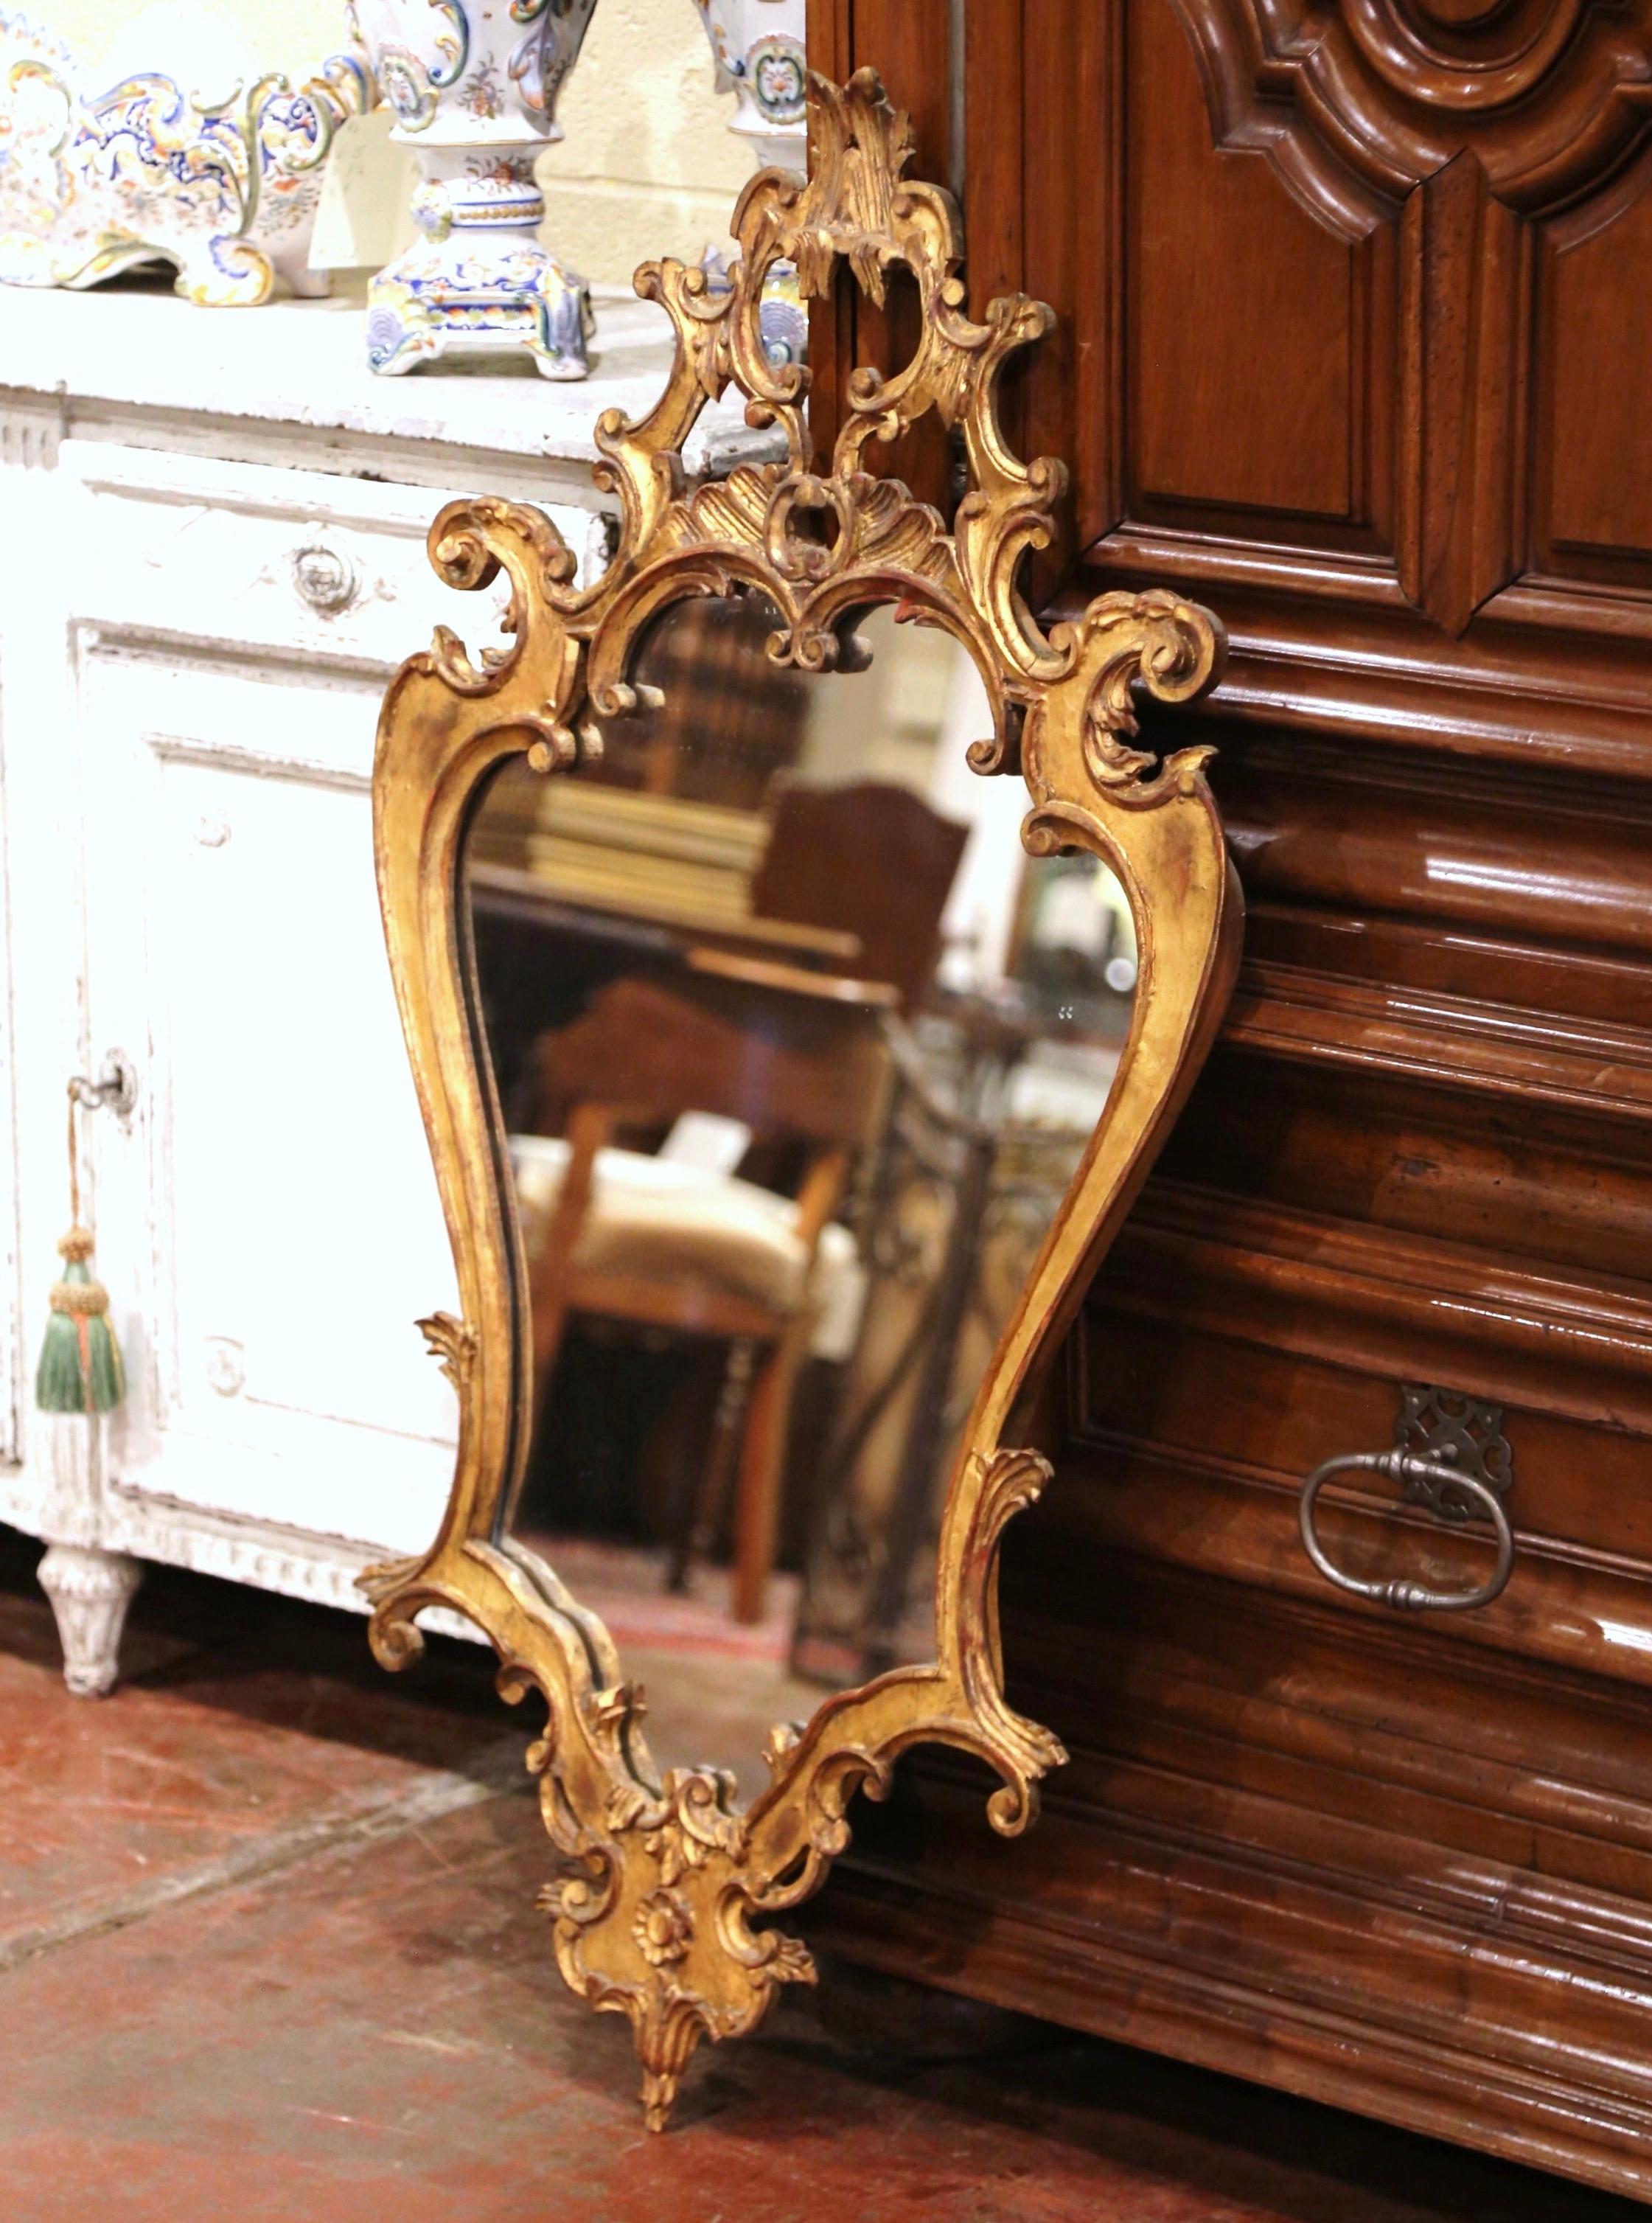 Crafted in Italy, circa 1920, the gilt mirror in the Louis XV style, features intricate carvings, including scroll and floral decor, and embellished with a carved shell cartouche at the top and bottom. The Rococo mirror is in excellent condition and